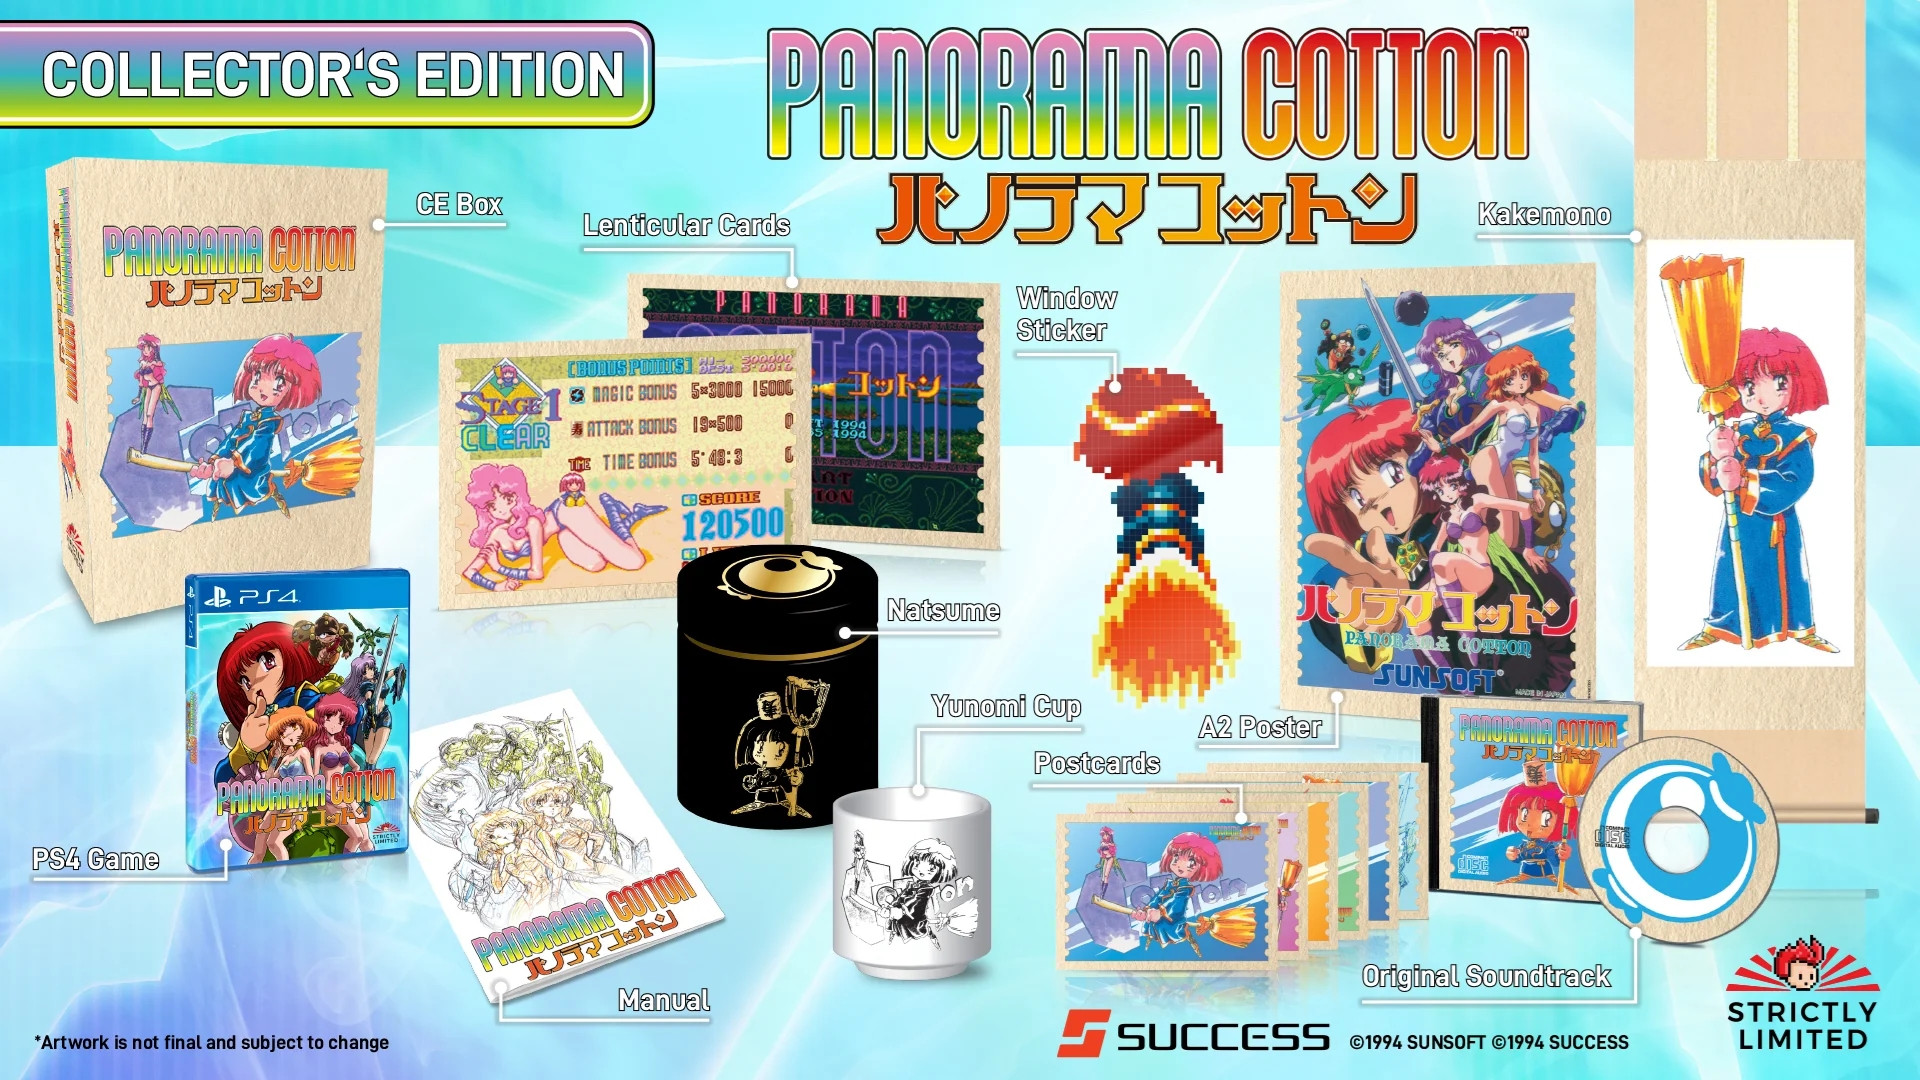 Panorama Cotton - Collector's Edition (Strictly Limited) (PS4), ININ Games, Strictly Limited Games